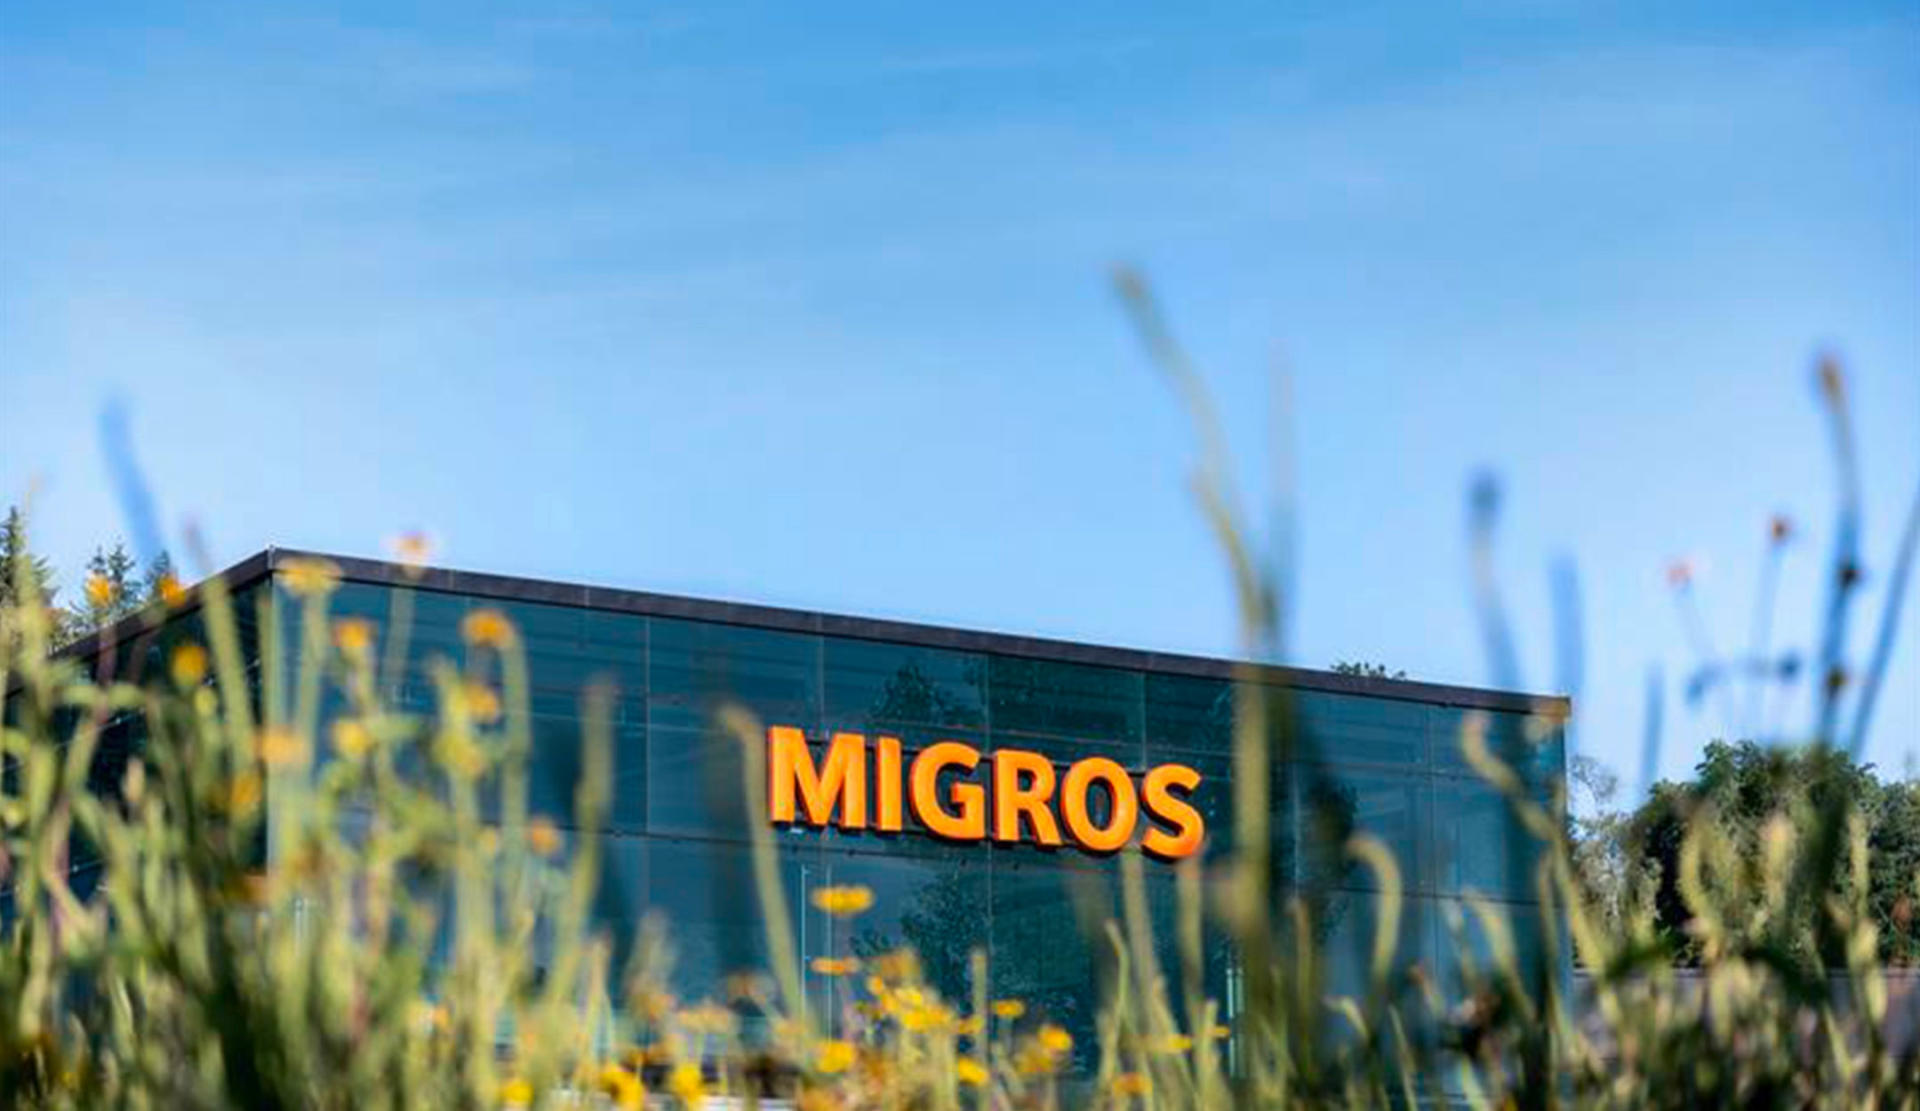 A modern building with the Migros logo